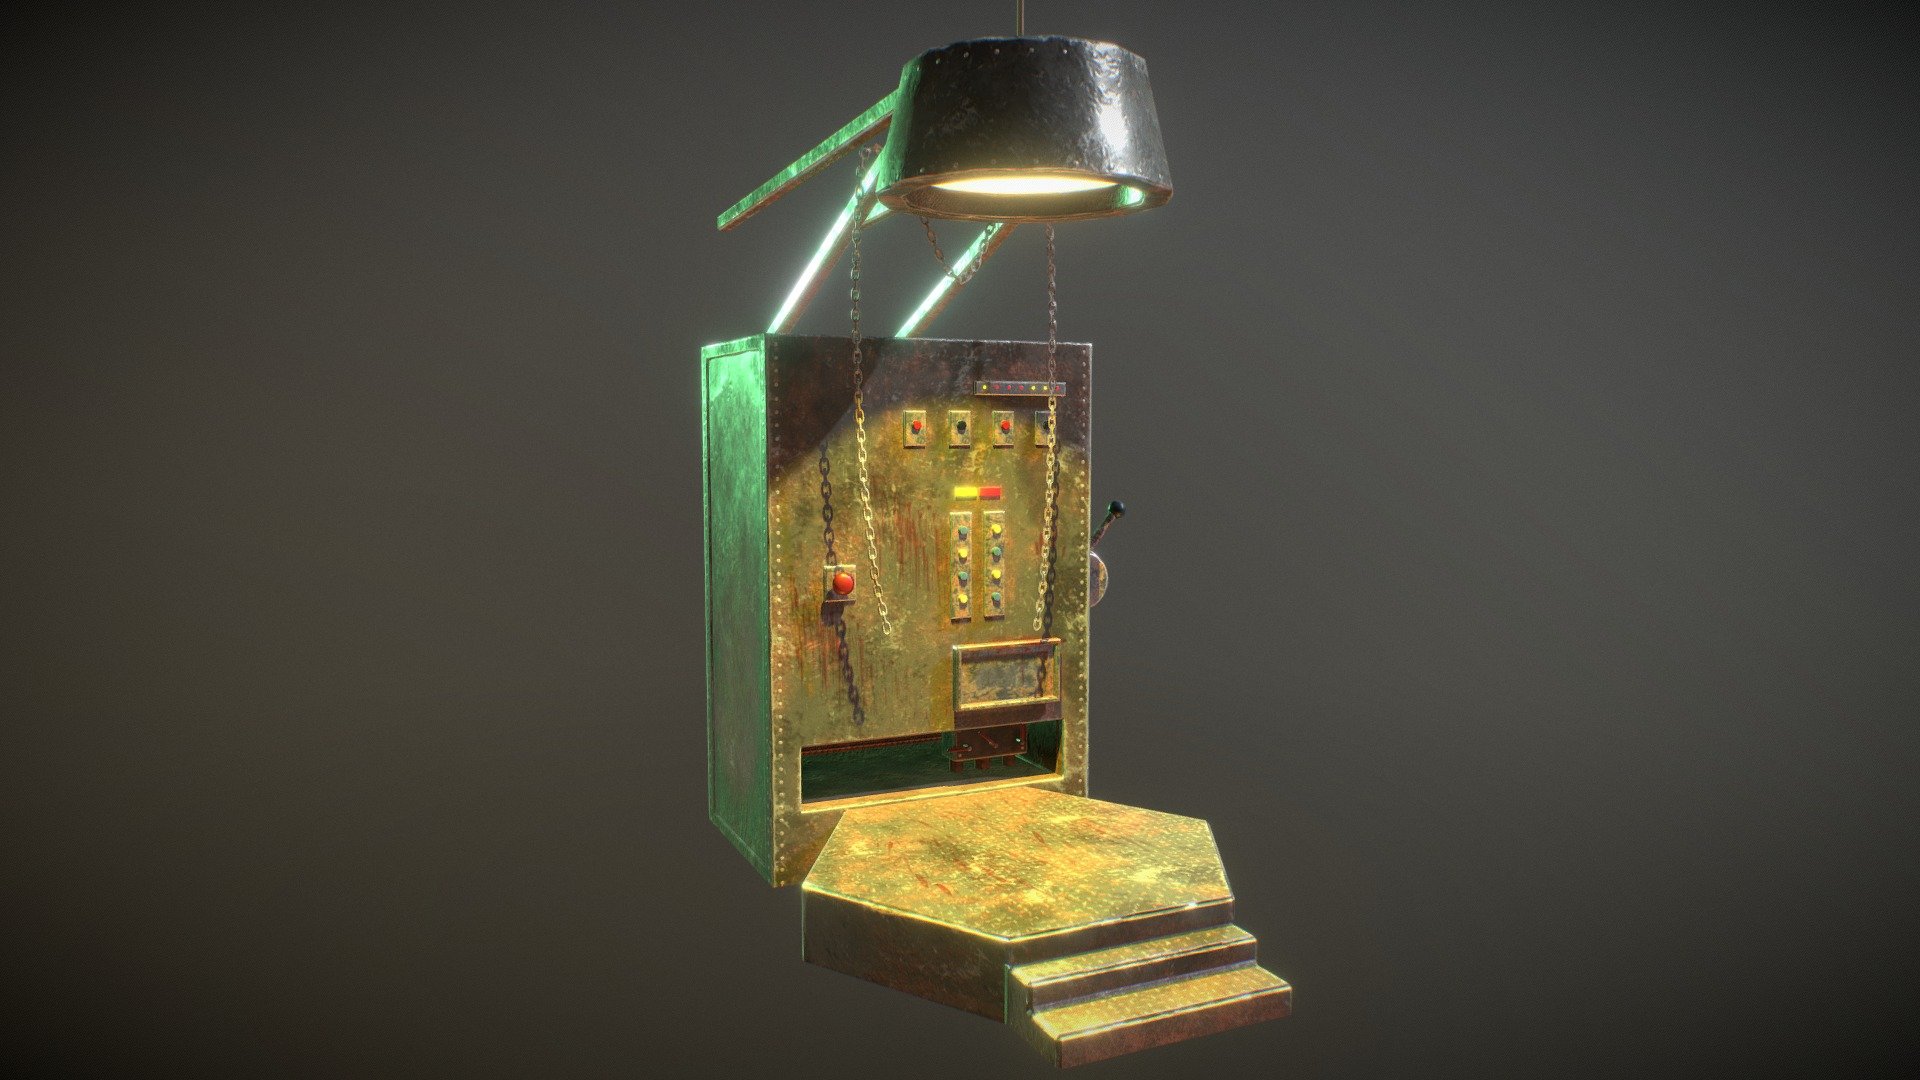 Torture Machine: LOD0: 28514 tris (1836 verts) and LOD1 1507 tris (1056 verts)
UV mapping Ch1 (some overlaping for symmetry or part repeated) and Ch2 (No overlapping)
Materials: 2



All meshes have PBR textures with Albedo, roughness, metallic, Ambient Occlusion, height, emissive (if required) and Normal Map.
Also contains the followings textures: Opacity mask (if required), Diffuse, Glossiness, Specular 3d model